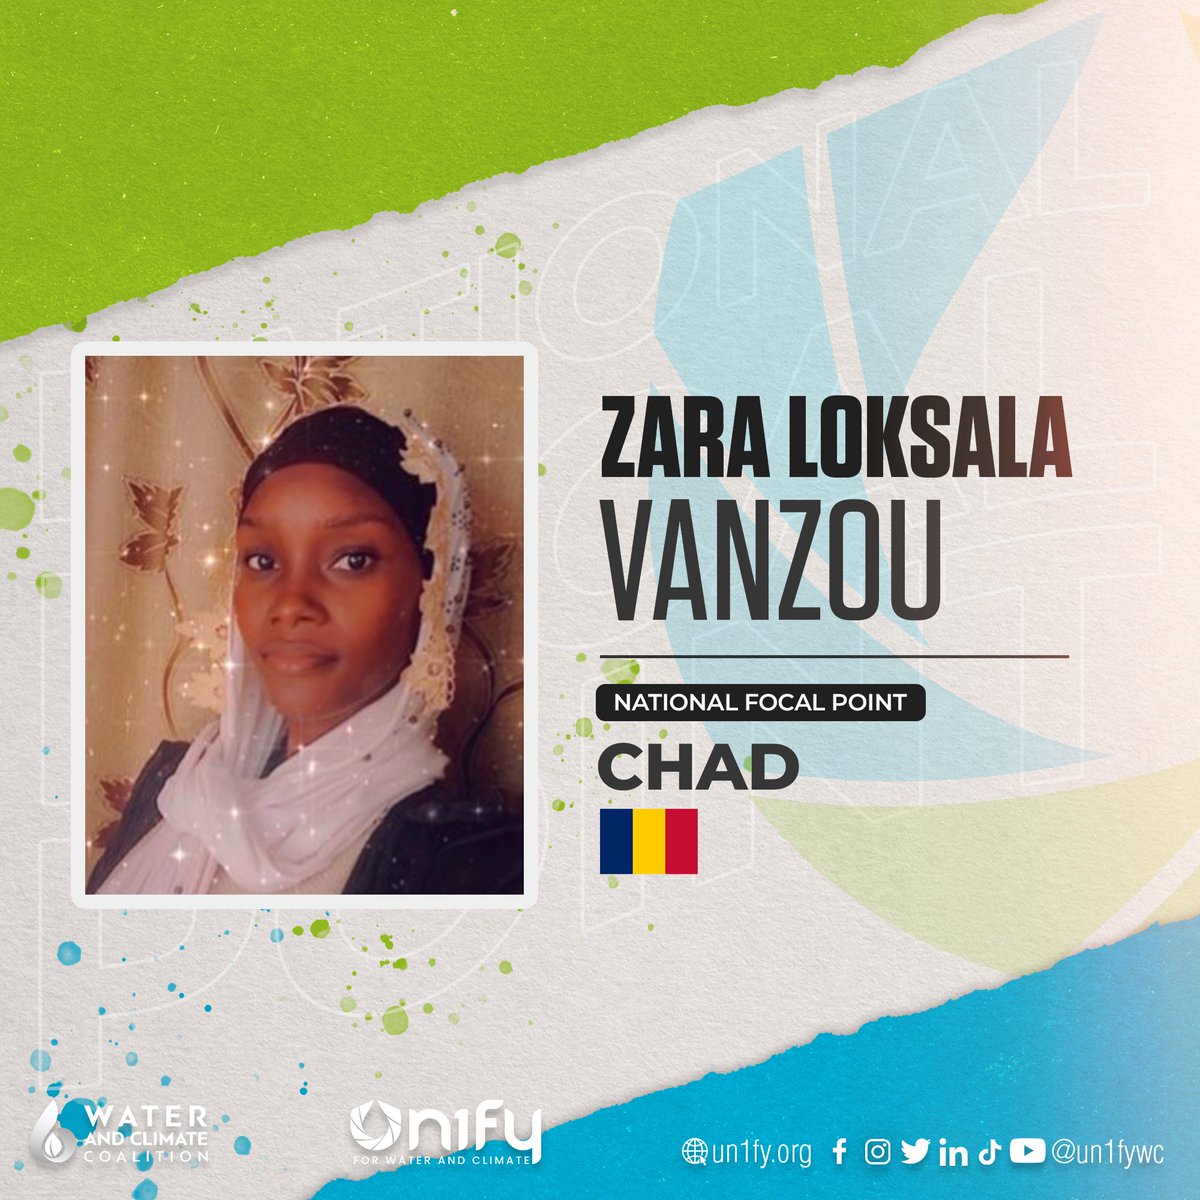 Introducing our National Focal Points for Chad, Zara Loksala Vanzou and Khouzeiffi Issakha Doud-bane. Are you from Chad and willing to advocate for water and climate? You can reach them via email at chad@un1fy.org #un2023waterconference #WaterAction #un1fy #un1fywc